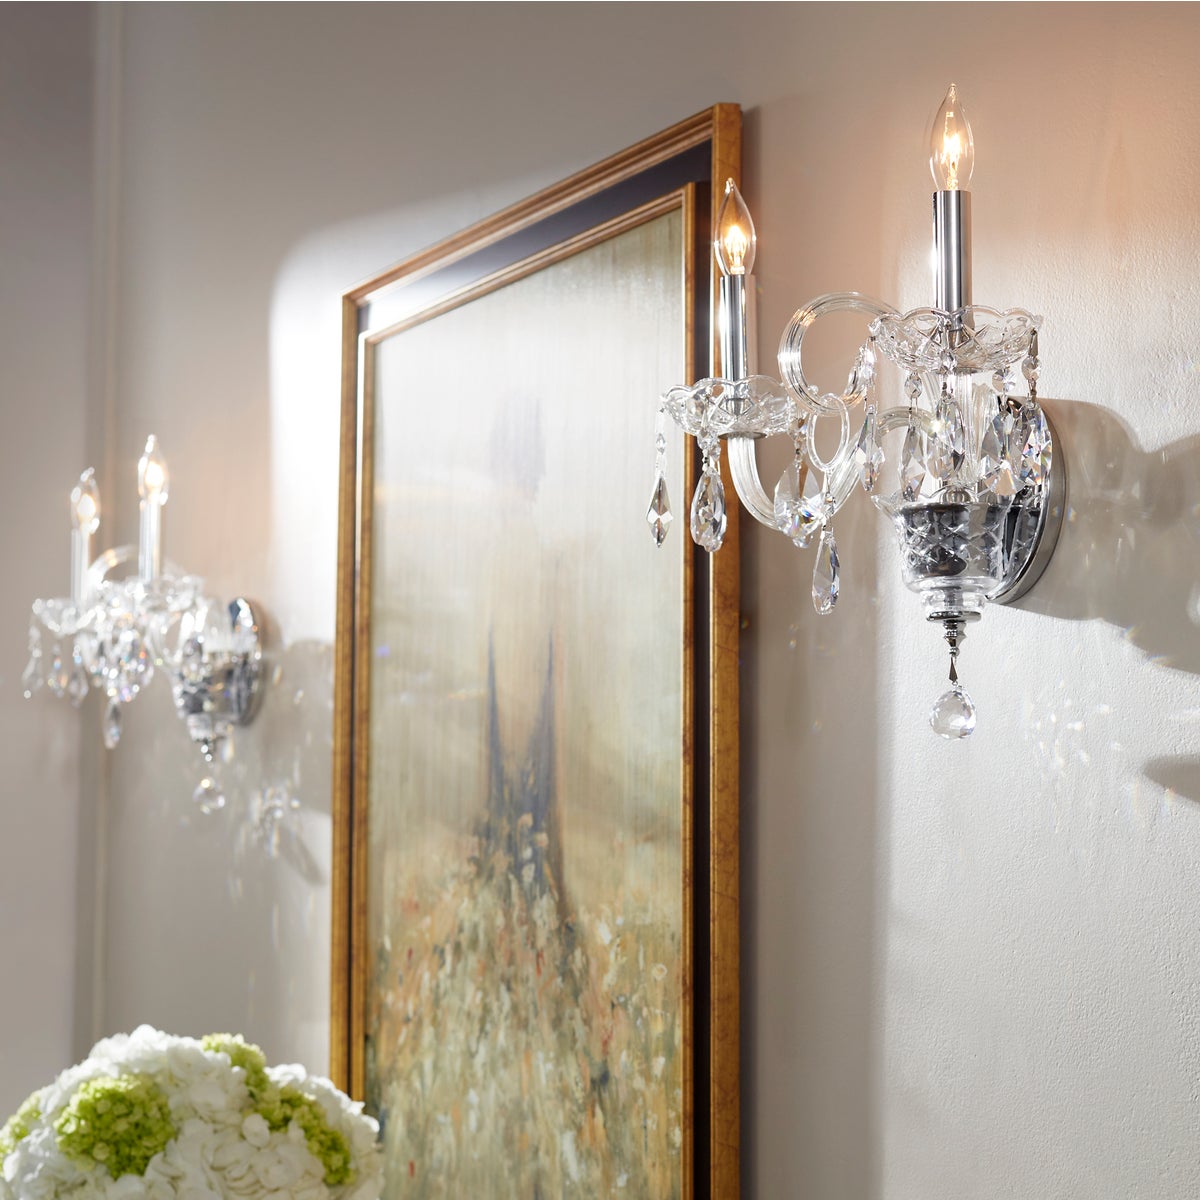 Crystal Wall Sconce with tear drop crystal accents, bringing classic design from 1740 into the present era. Chrome fixture with prismatic effects, adding a luxurious touch to any space. 2-bulb, 60W, dimmable, UL Listed. Dimensions: 13.5"W x 10.5"H x 8.5"E. Warranty: 2 Years.